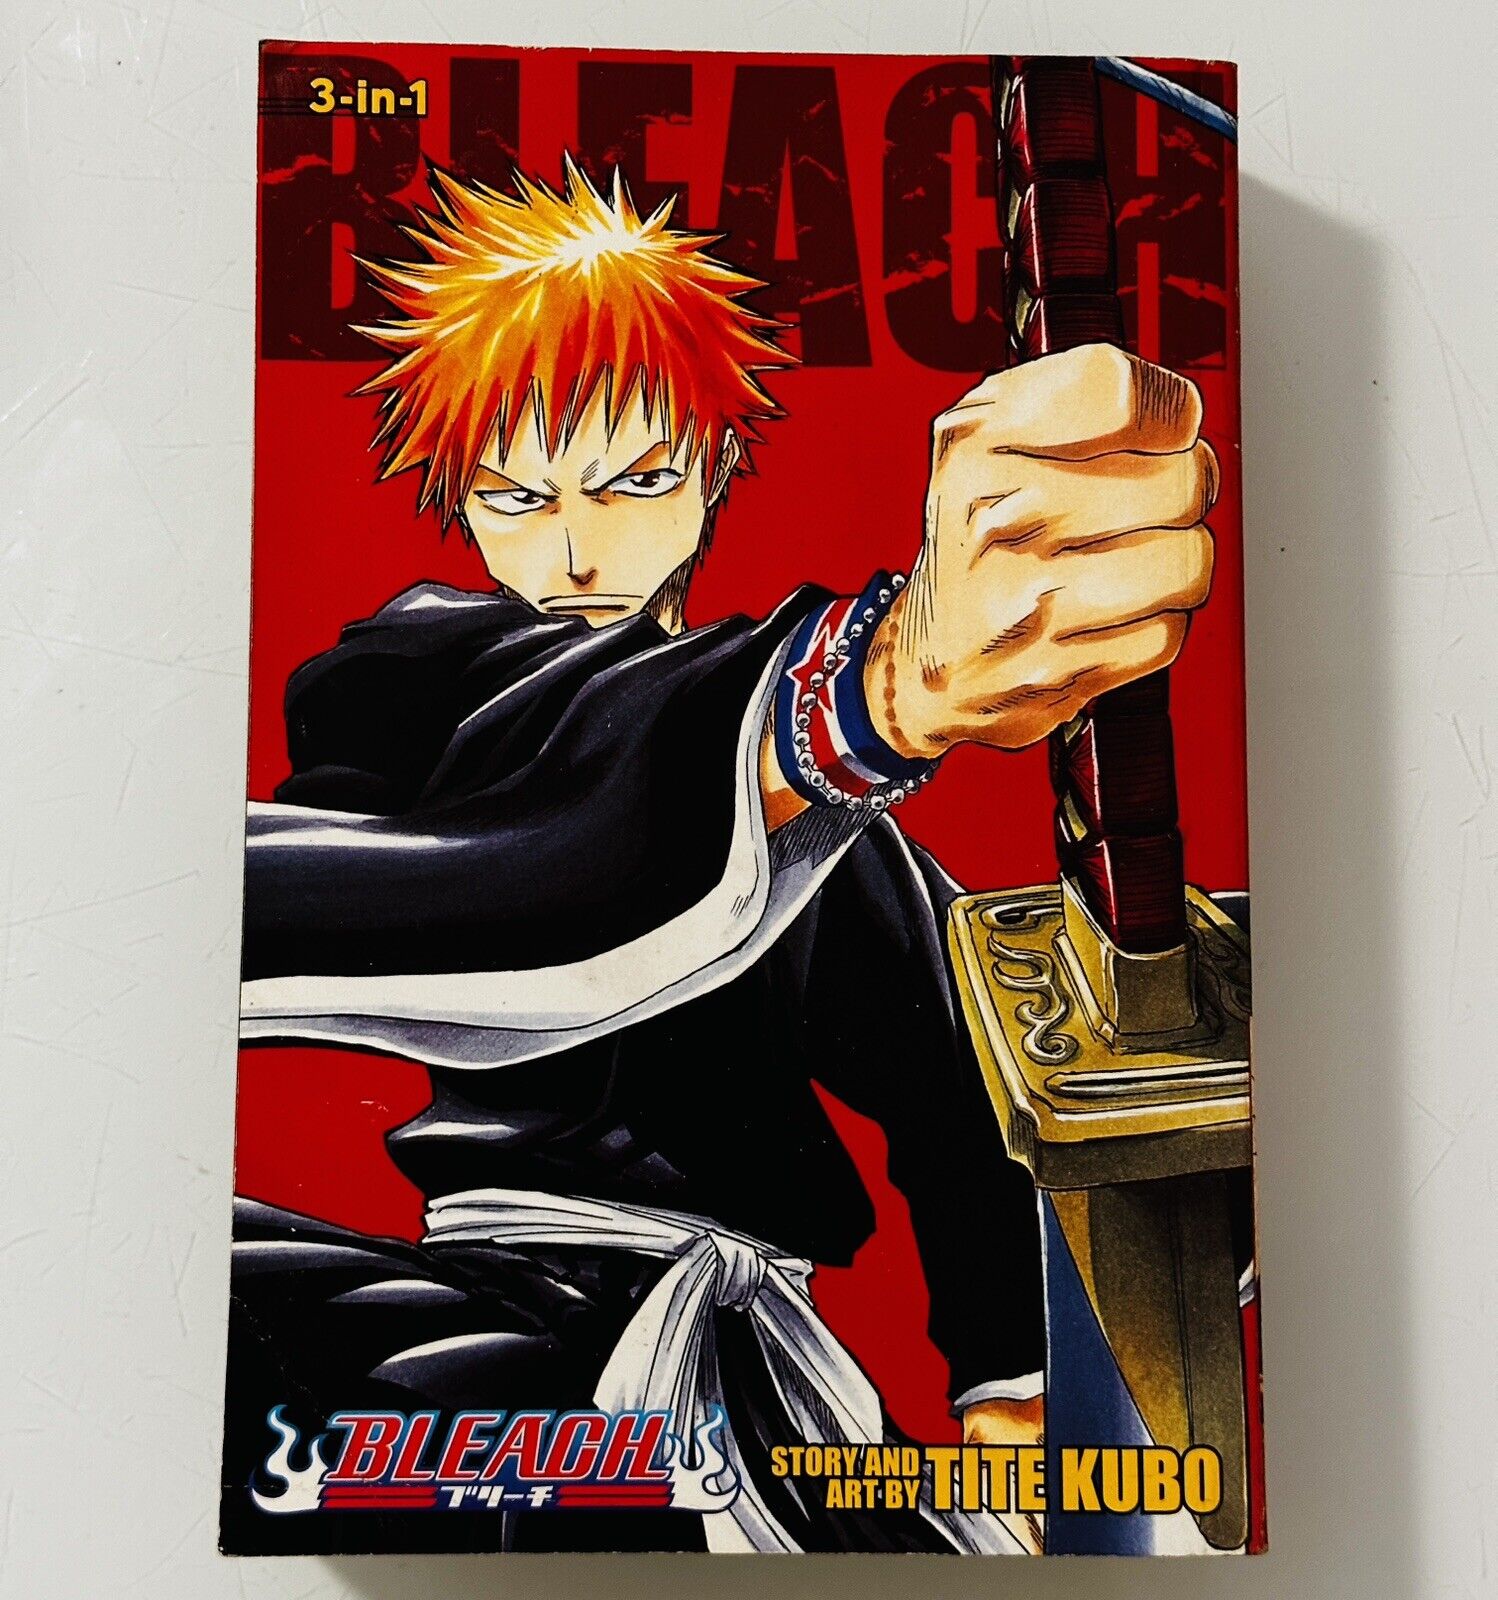 Bleach (3-In-1 Edition), Vol. 1 : Includes Vols. 1, 2 And 3 by Tite Kubo (2011)